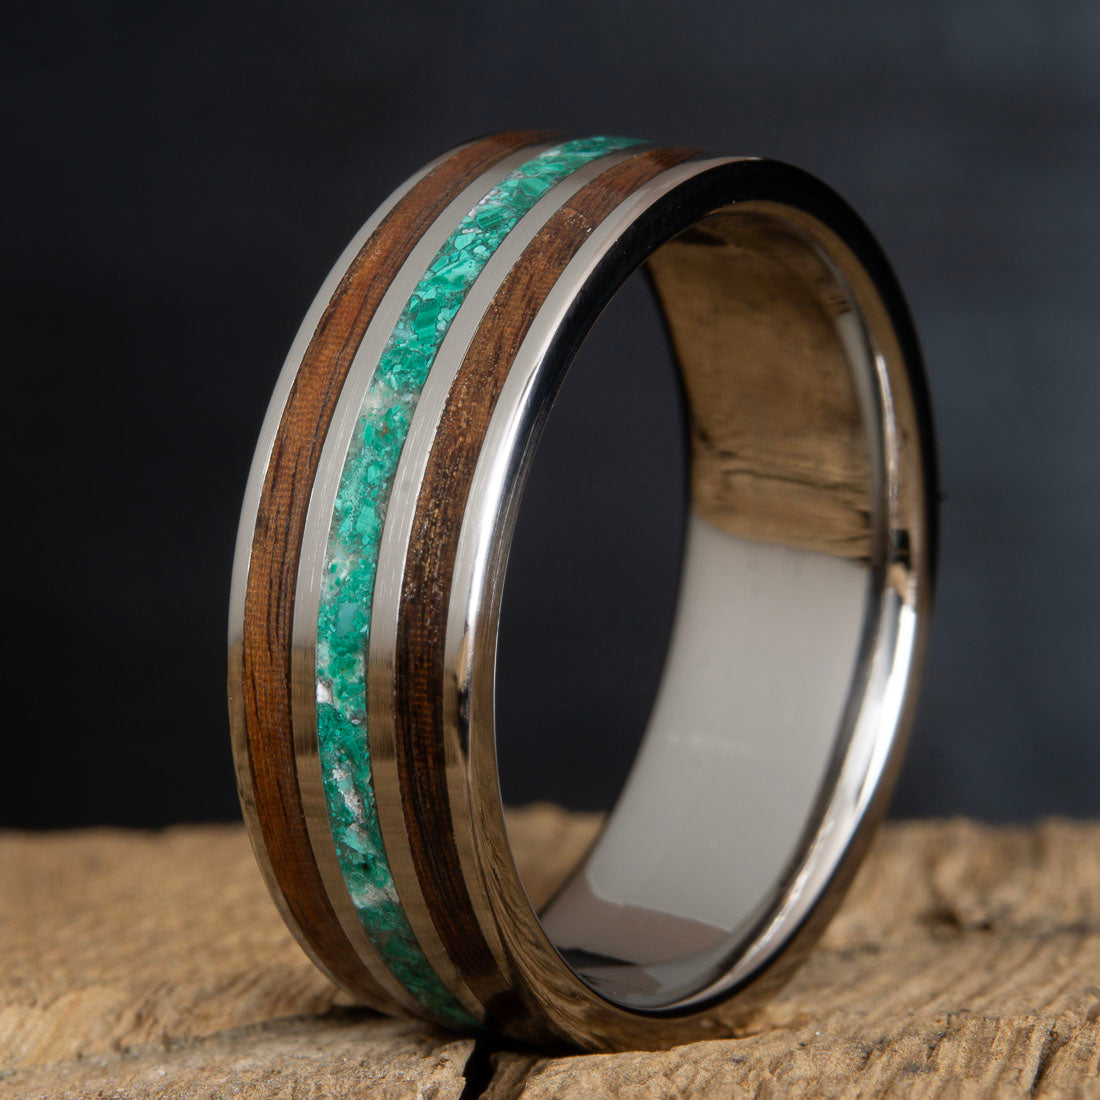 Satin Titanium Wood Lined Ring with Whiskey Barrel White Oak 6mm / 5-14 whole-half-quarter-available-enter in Notes During Checkout